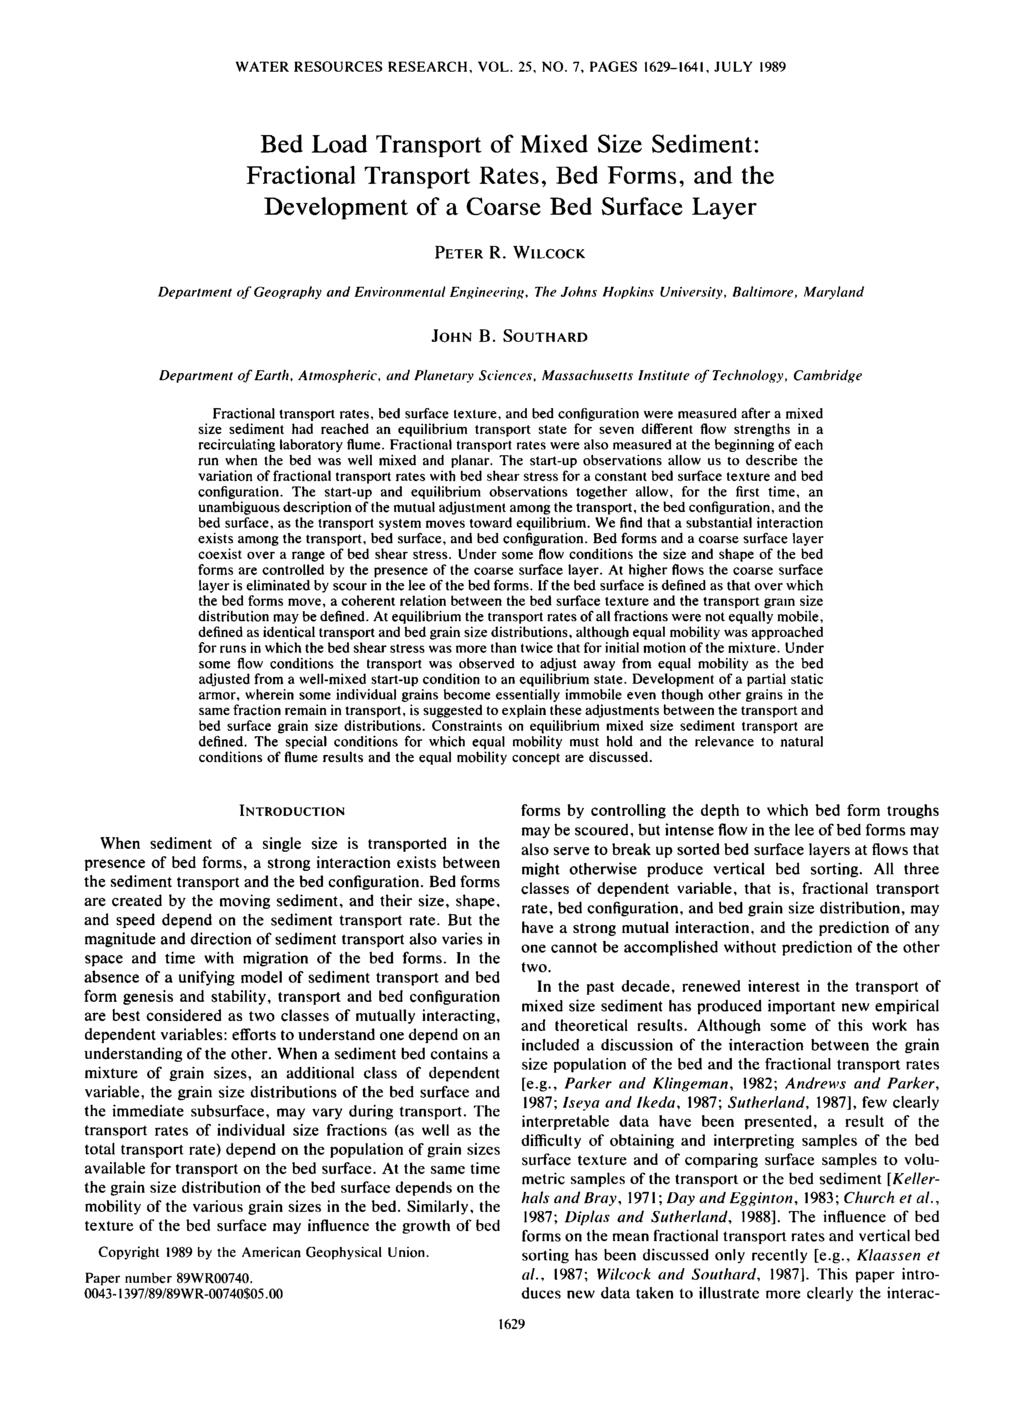 WATER RESOURCES RESEARCH, VOL. 25, NO. 7, PAGES 1629-1641, JULY 1989 Bed Lad Transprt f Mixed Size Sediment' Fractinal Transprt Rates, Bed Frms, and the Develpment f a Carse Bed Surface Layer PETER R.